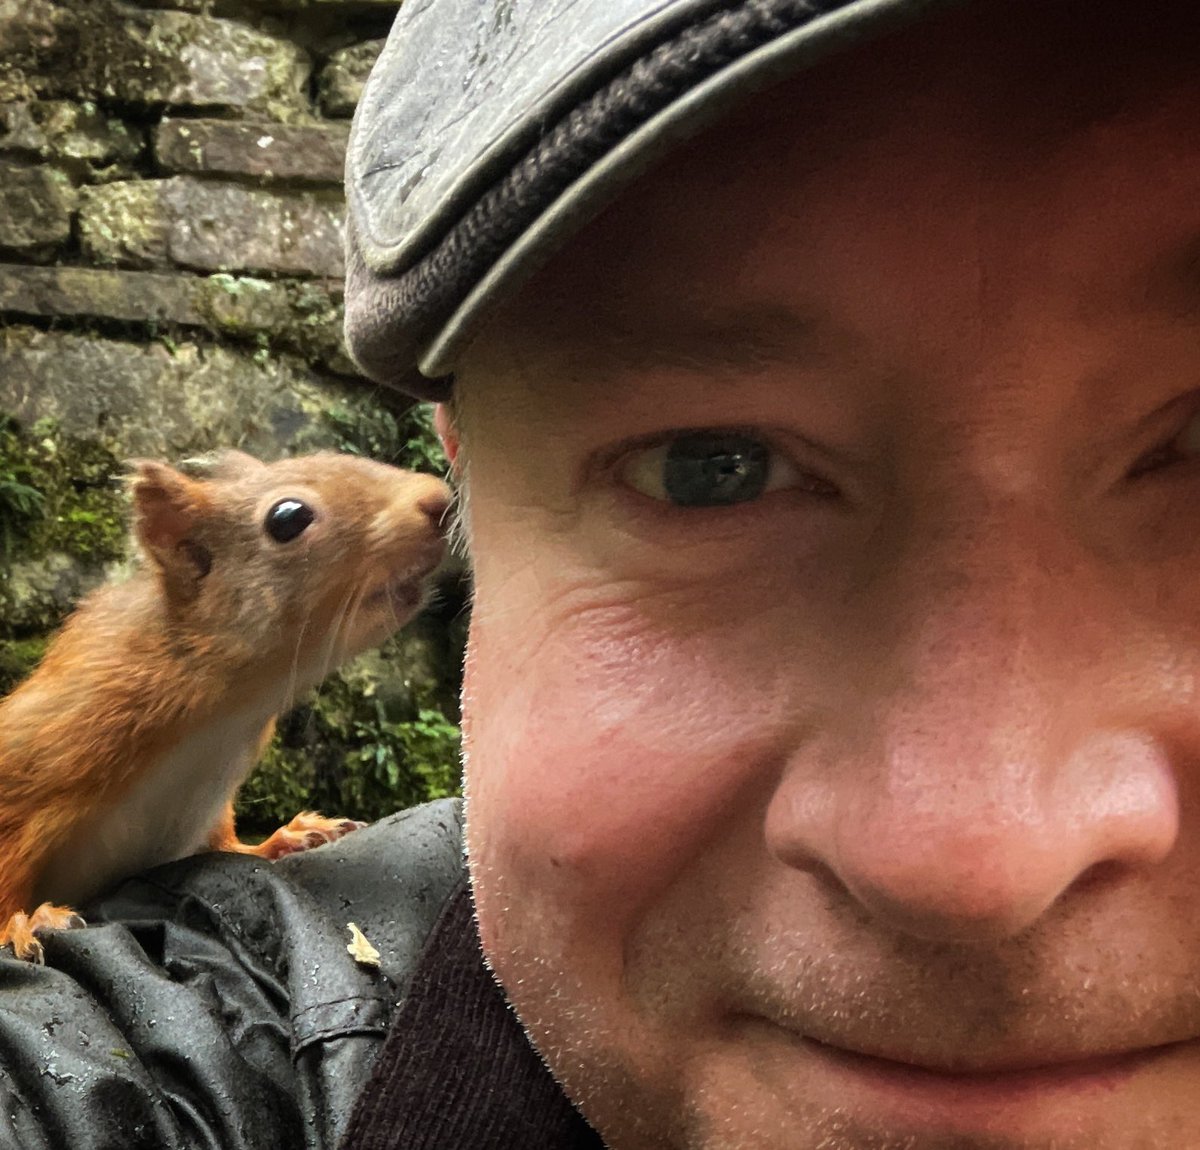 SQUEAKY BUM TIME! 😬😬 Not long to go until my latest #lakedistrict film ‘Cumbria’s Red Squirrels’ hits TV screens! 🐿️🎥📺 9pm BBC Four & iPlayer #redsquirrel #nature I hope you all enjoy the abridged edit of my latest passion project film showcasing Cumbria and “red scamps”!🤞🎥